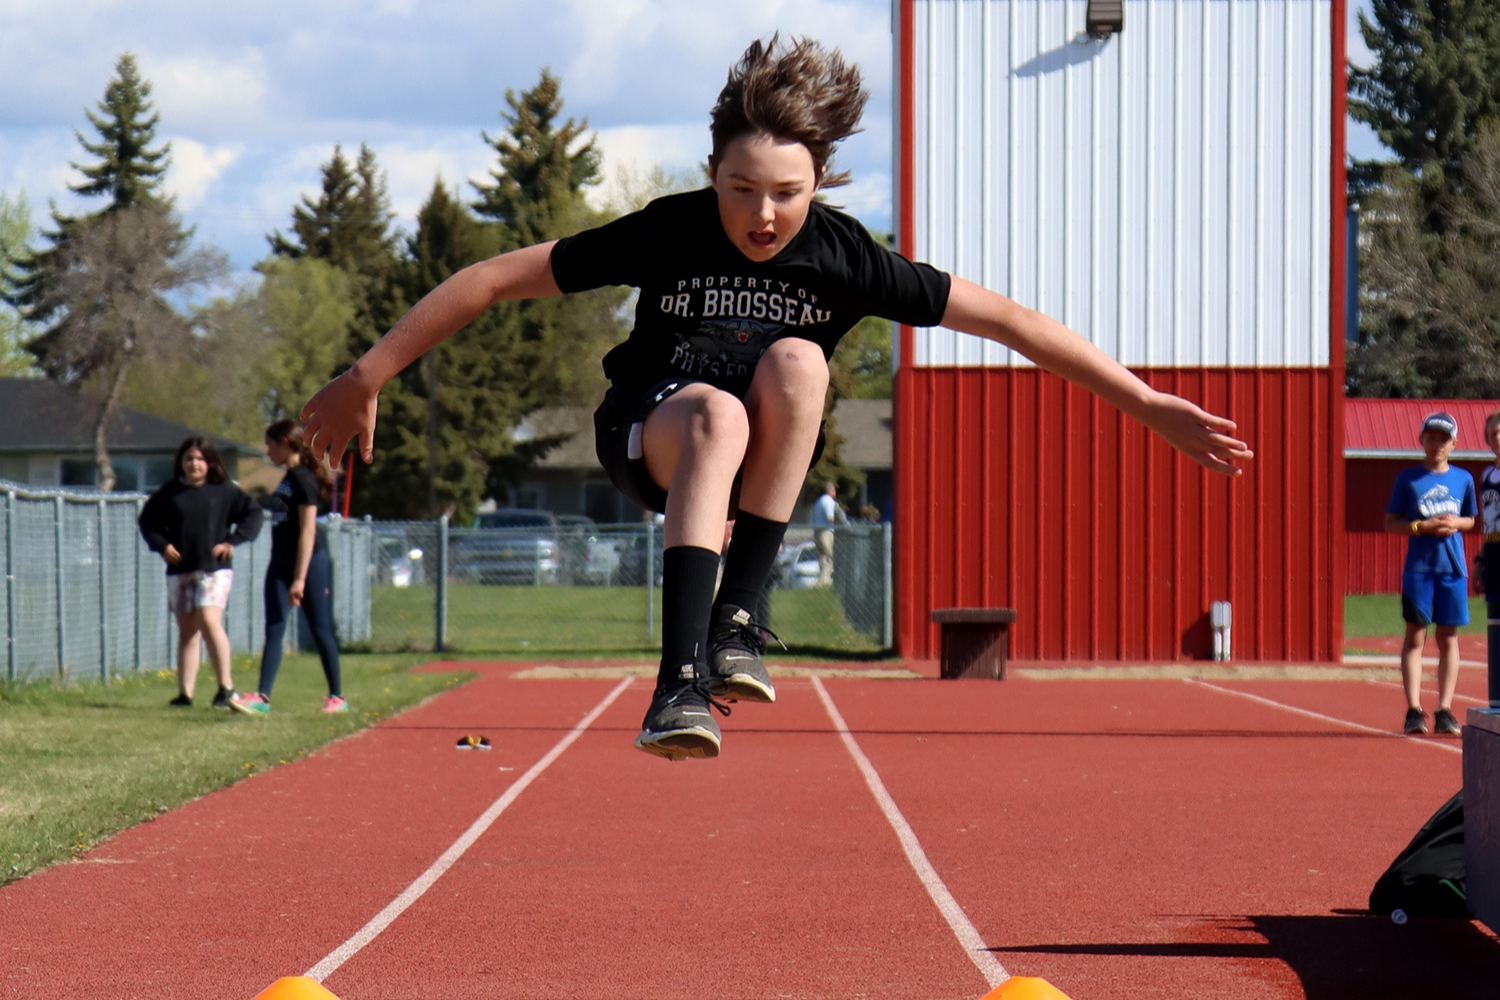 Boy jumping at track and field